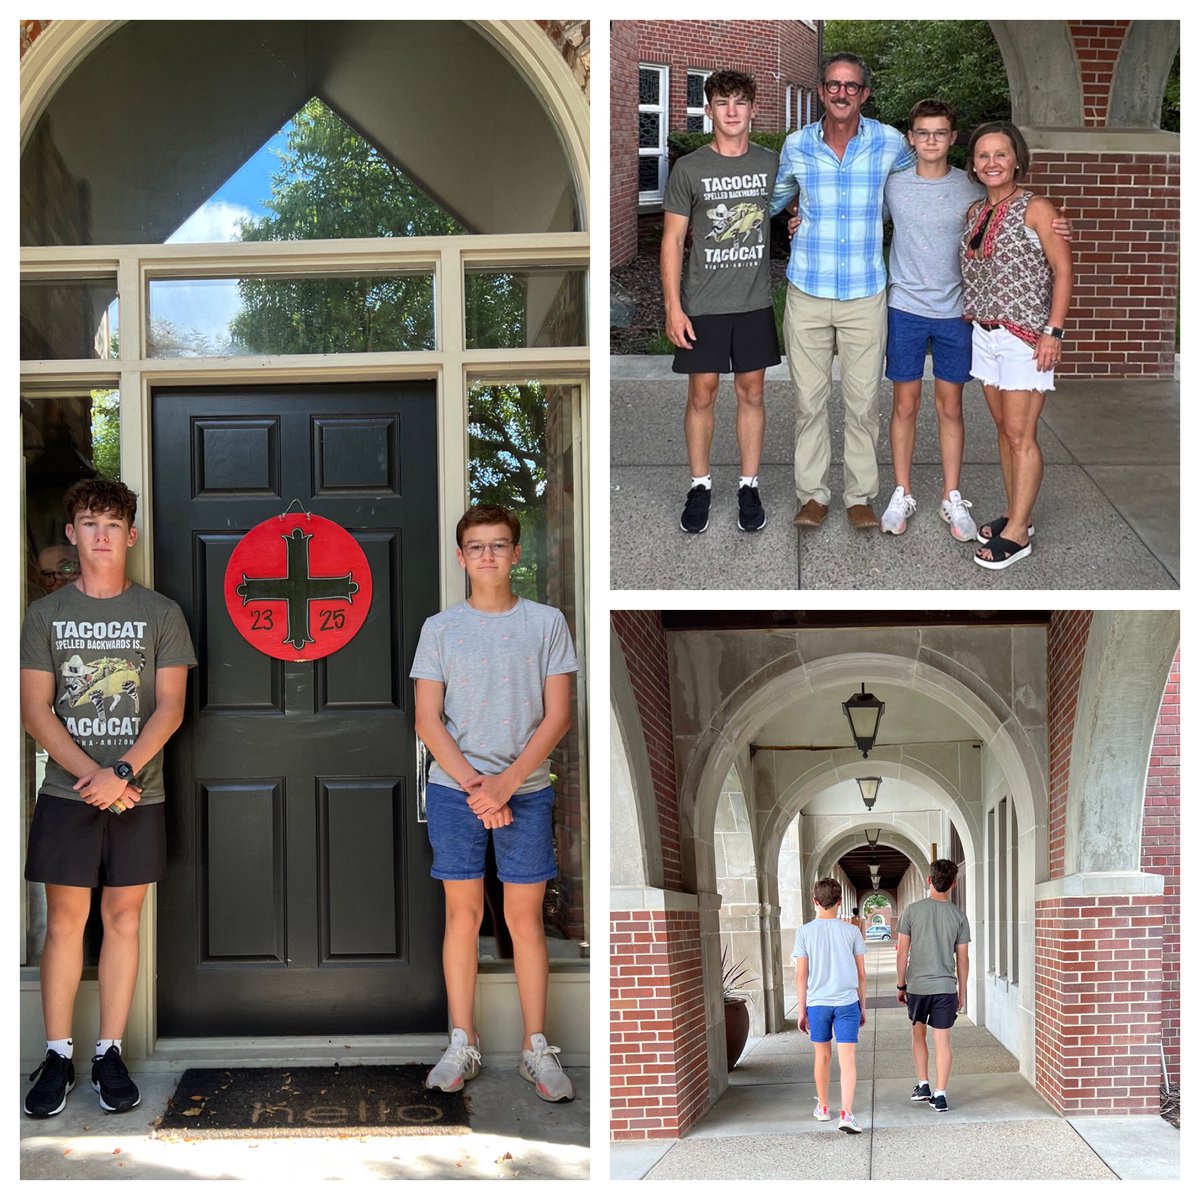 And just like that they’re off to Senior & Sophomore year. Let’s go boys! 💪🏻
❤️⚔️🖤 #MountMichael #BoardingSchoolLife #WhereWeBelong #ClassOf23&25 #TimeFlies